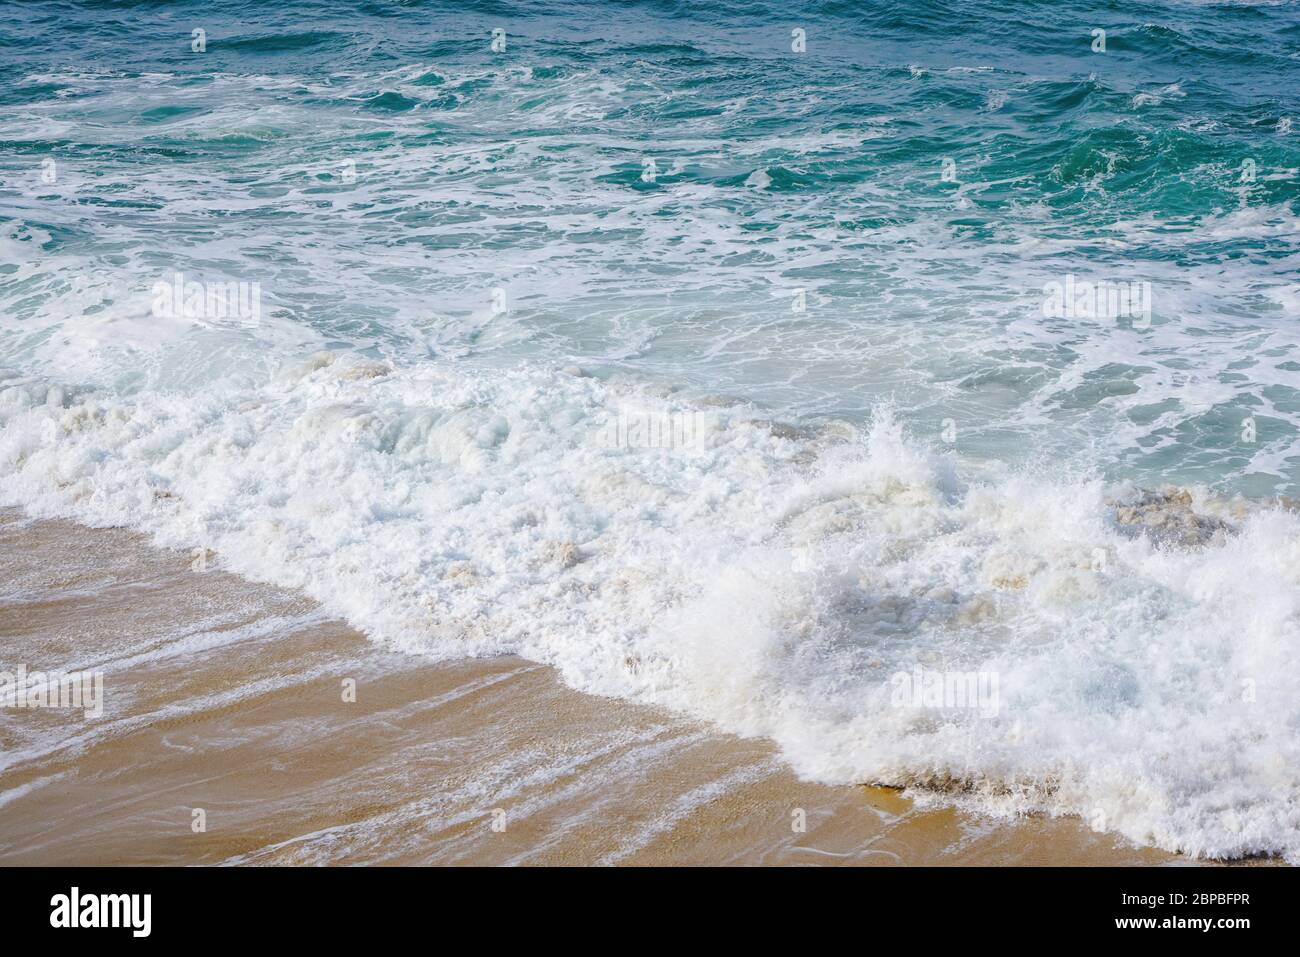 Turquoise ocean water with small white foam waves gently crashing into golden sand beach Stock Photo